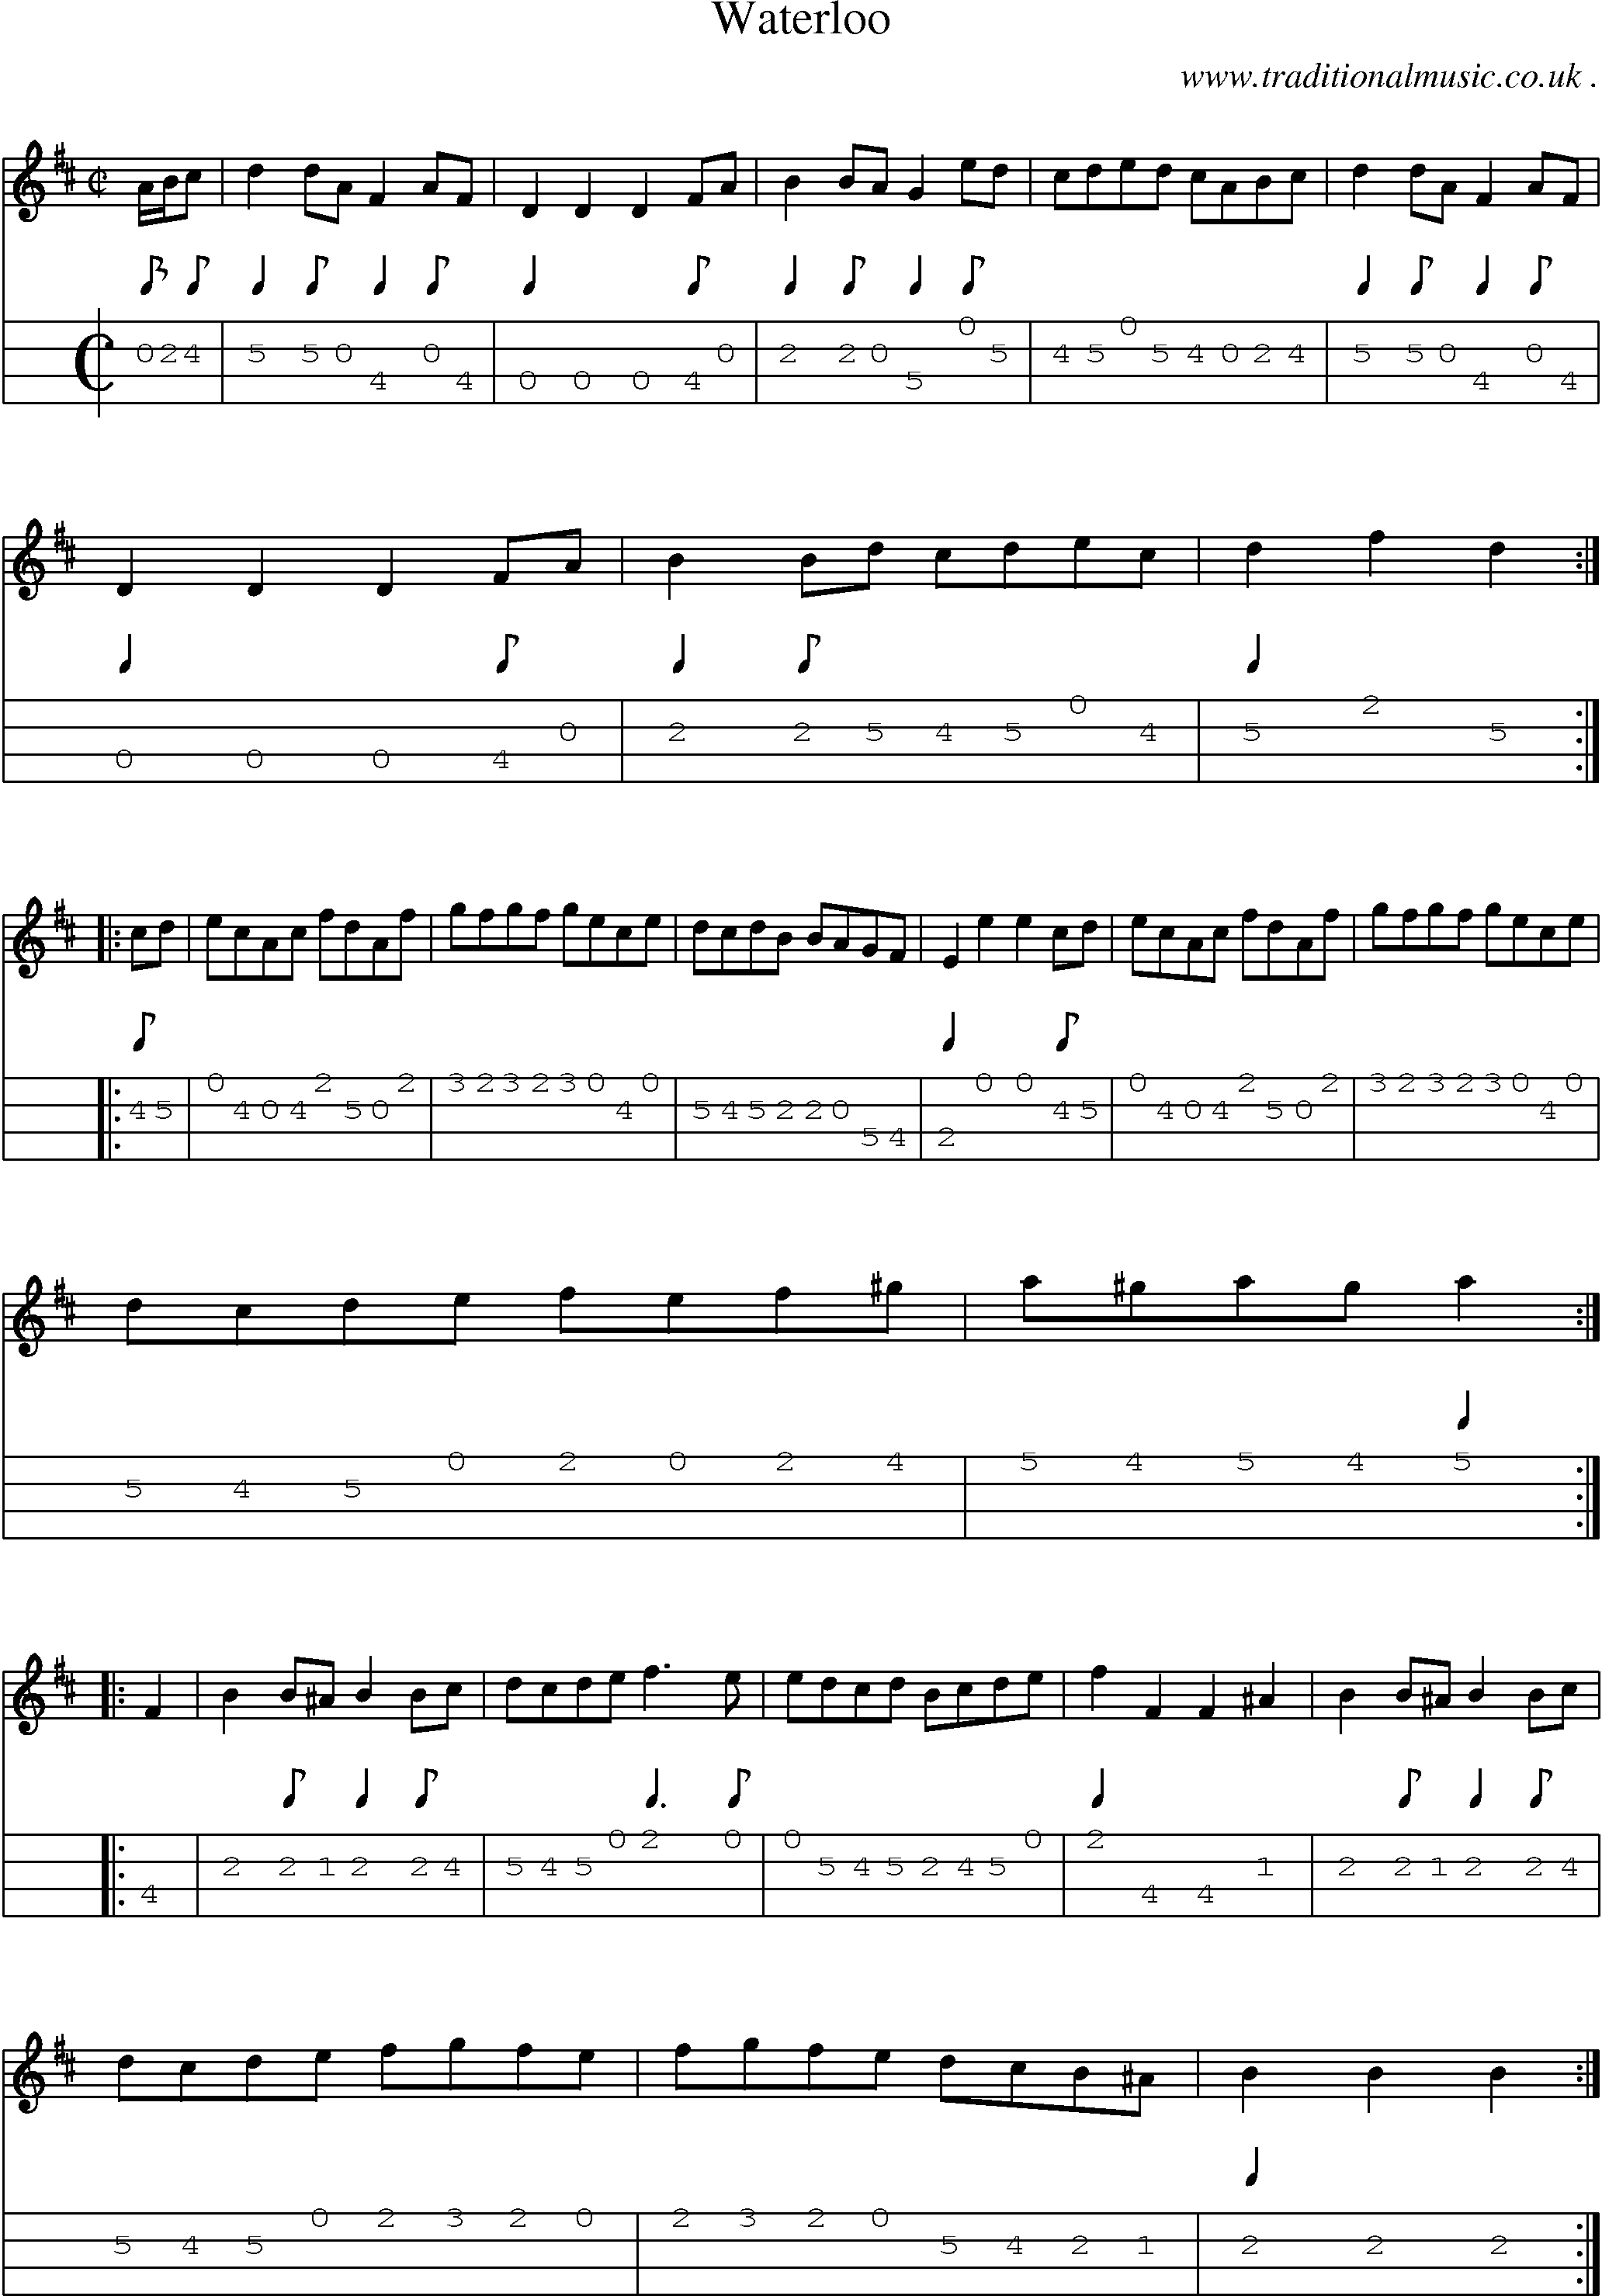 Sheet-music  score, Chords and Mandolin Tabs for Waterloo